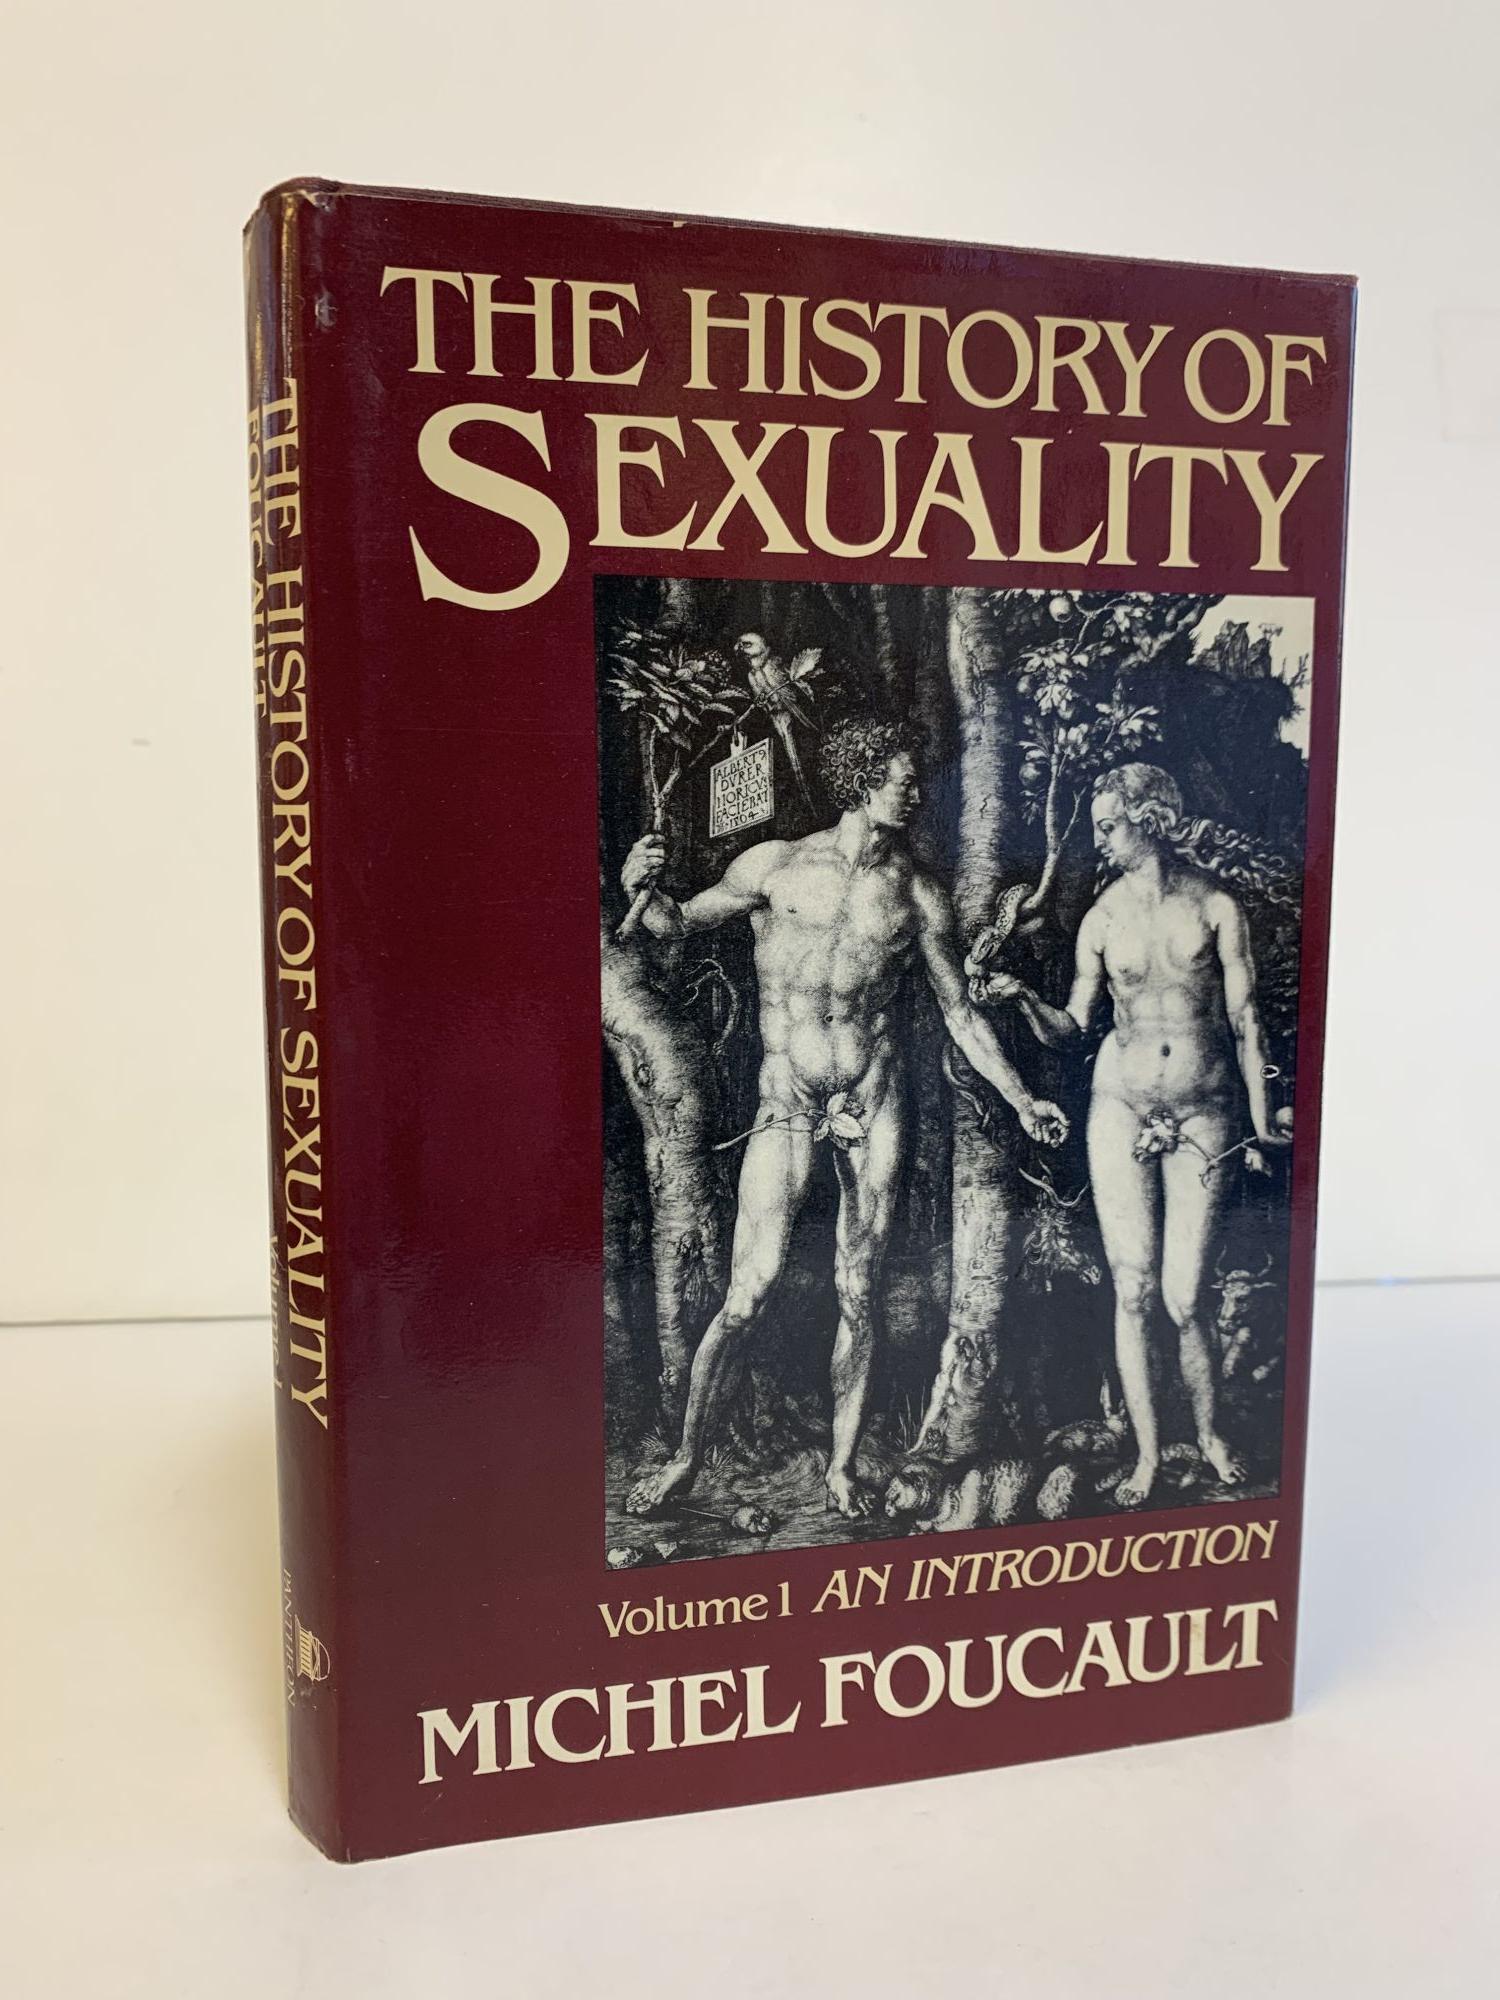 THE HISTORY OF SEXUALITY VOLUME 1: AN INTRODUCTION - Foucault, Michel; Hurley, Robert [Translator]